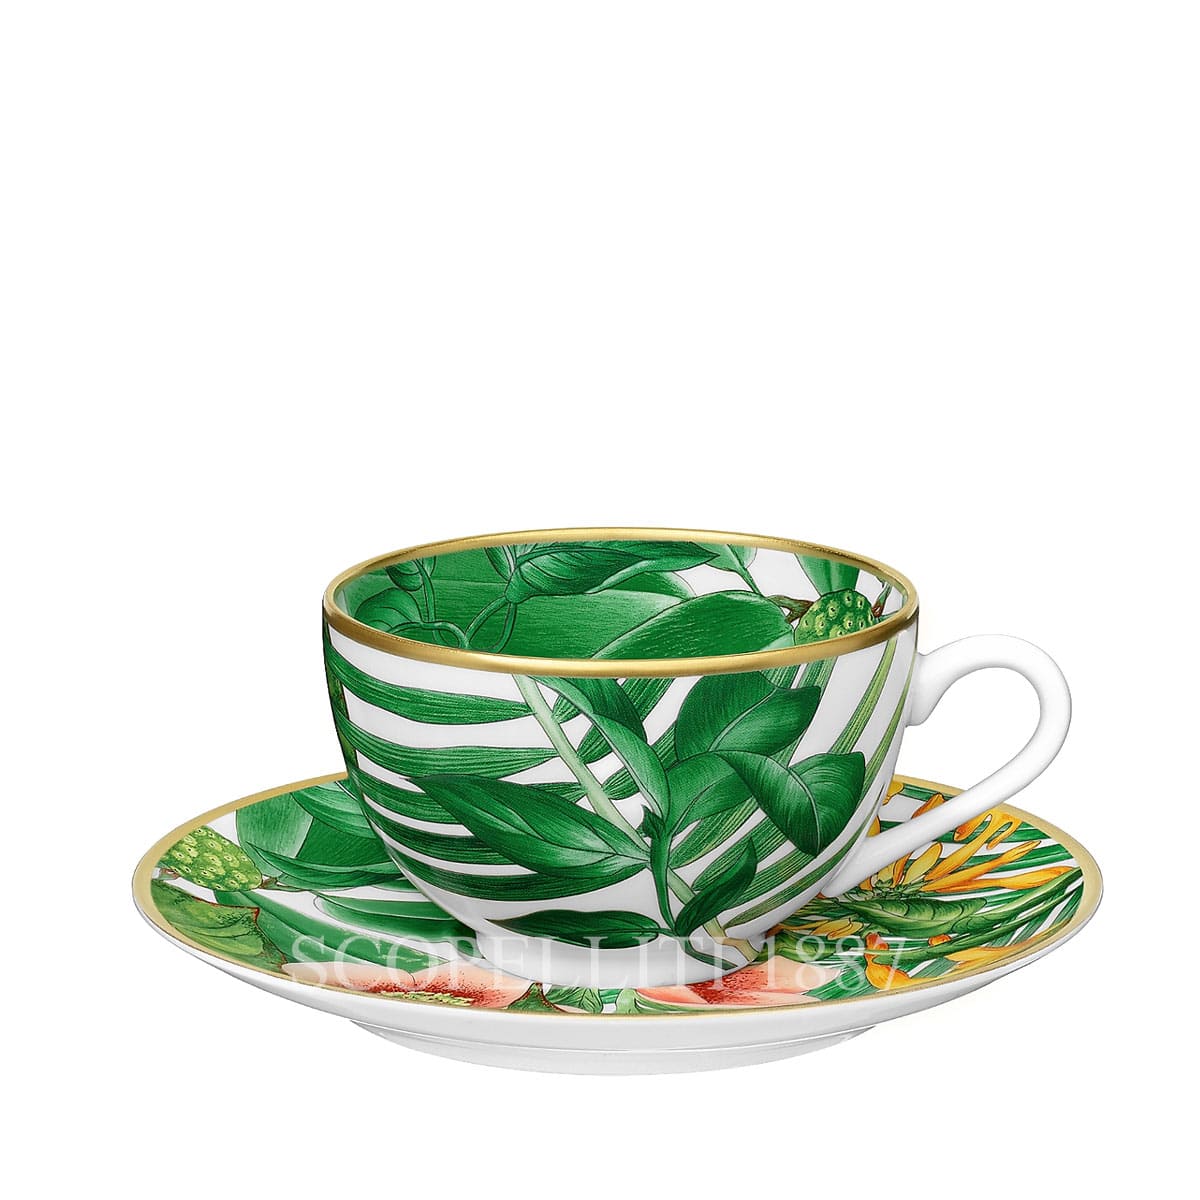 hermes cup and saucer set